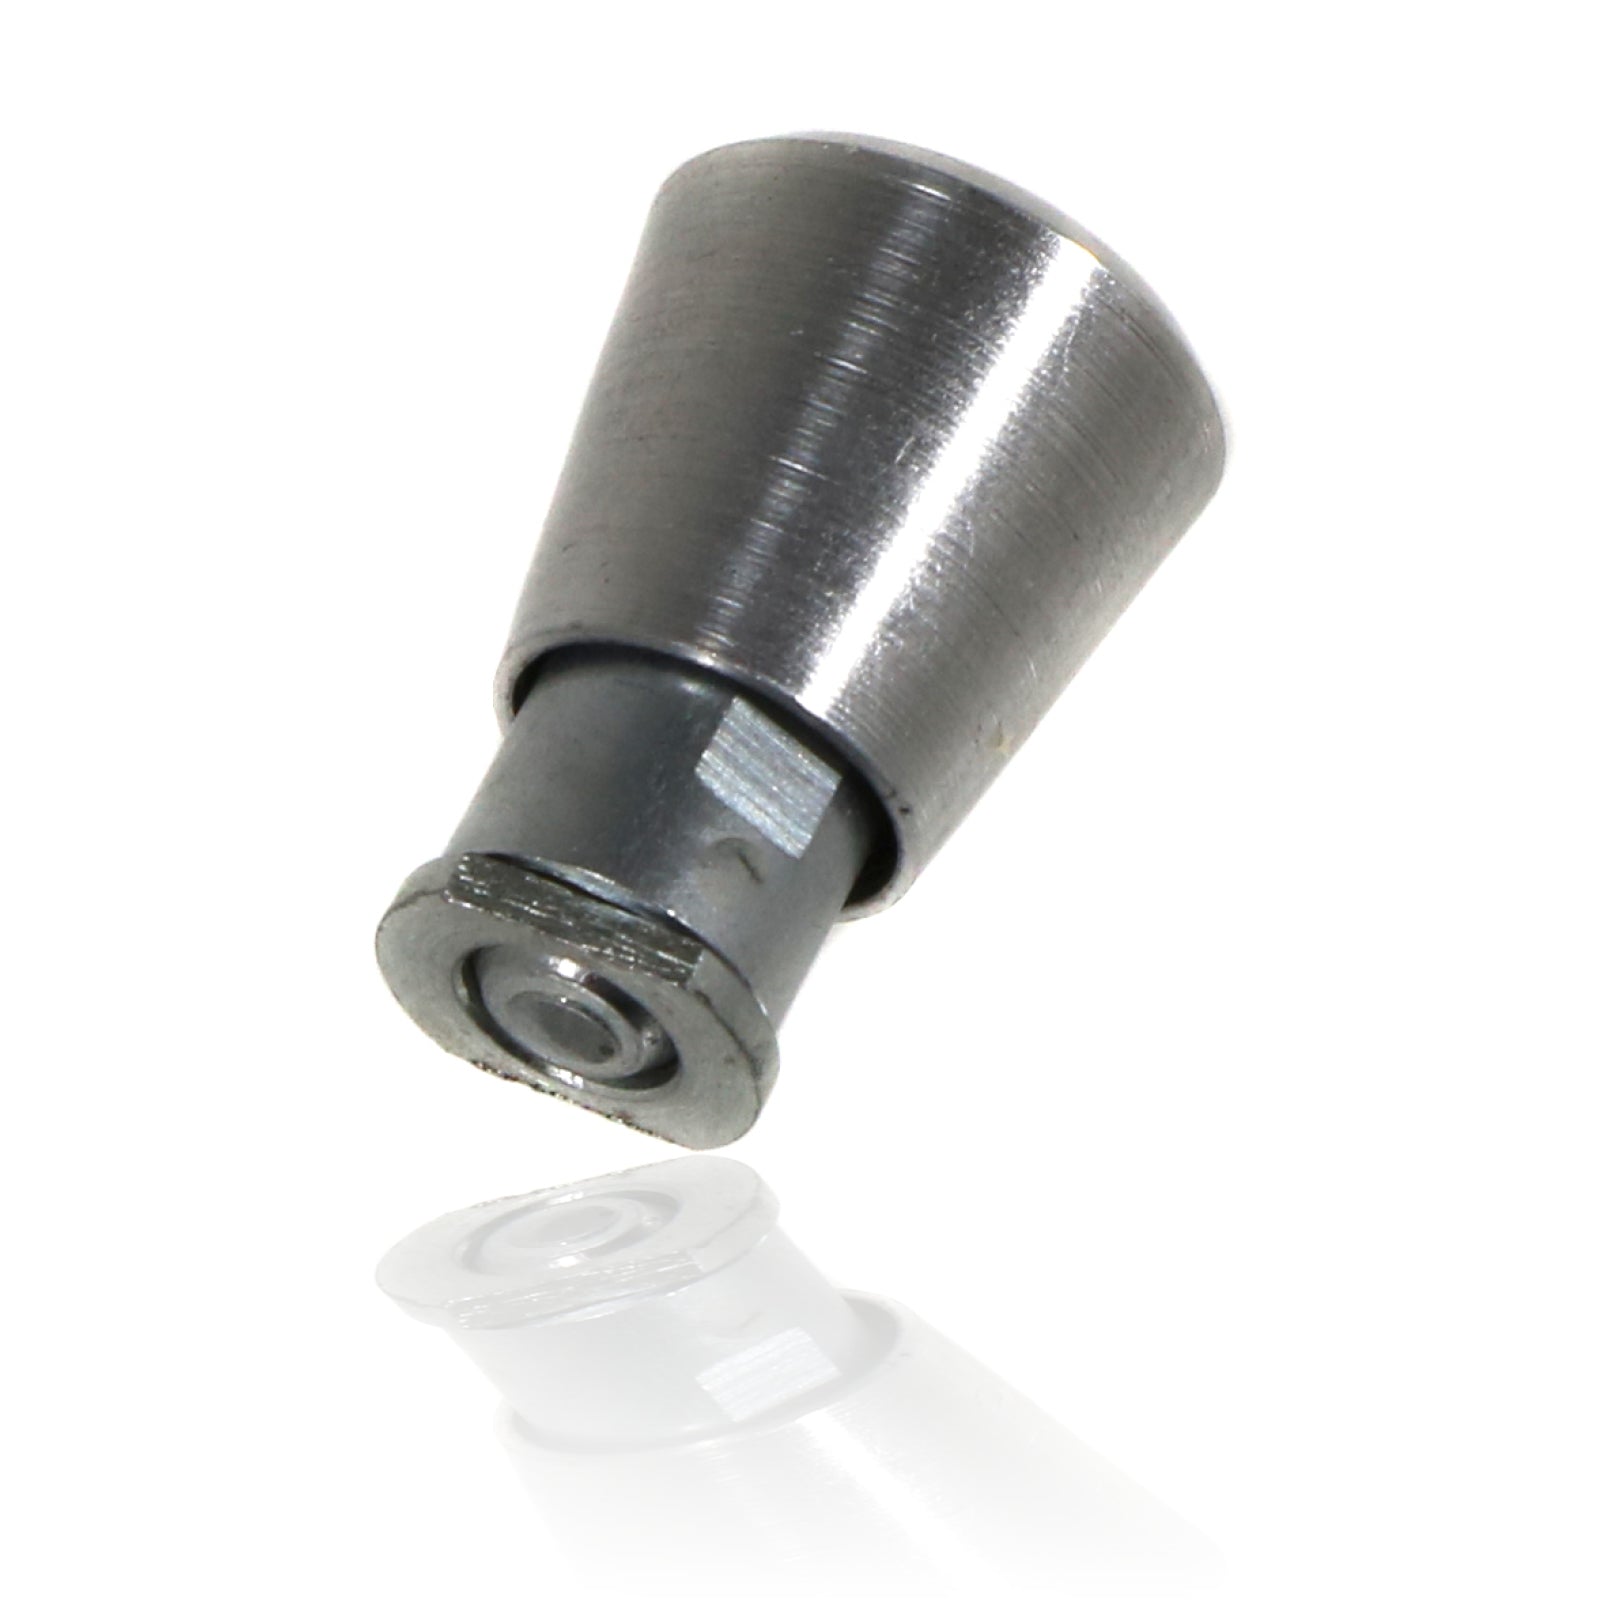 M7 Mini Index Plunger for Thin-Walled Material stainless steel